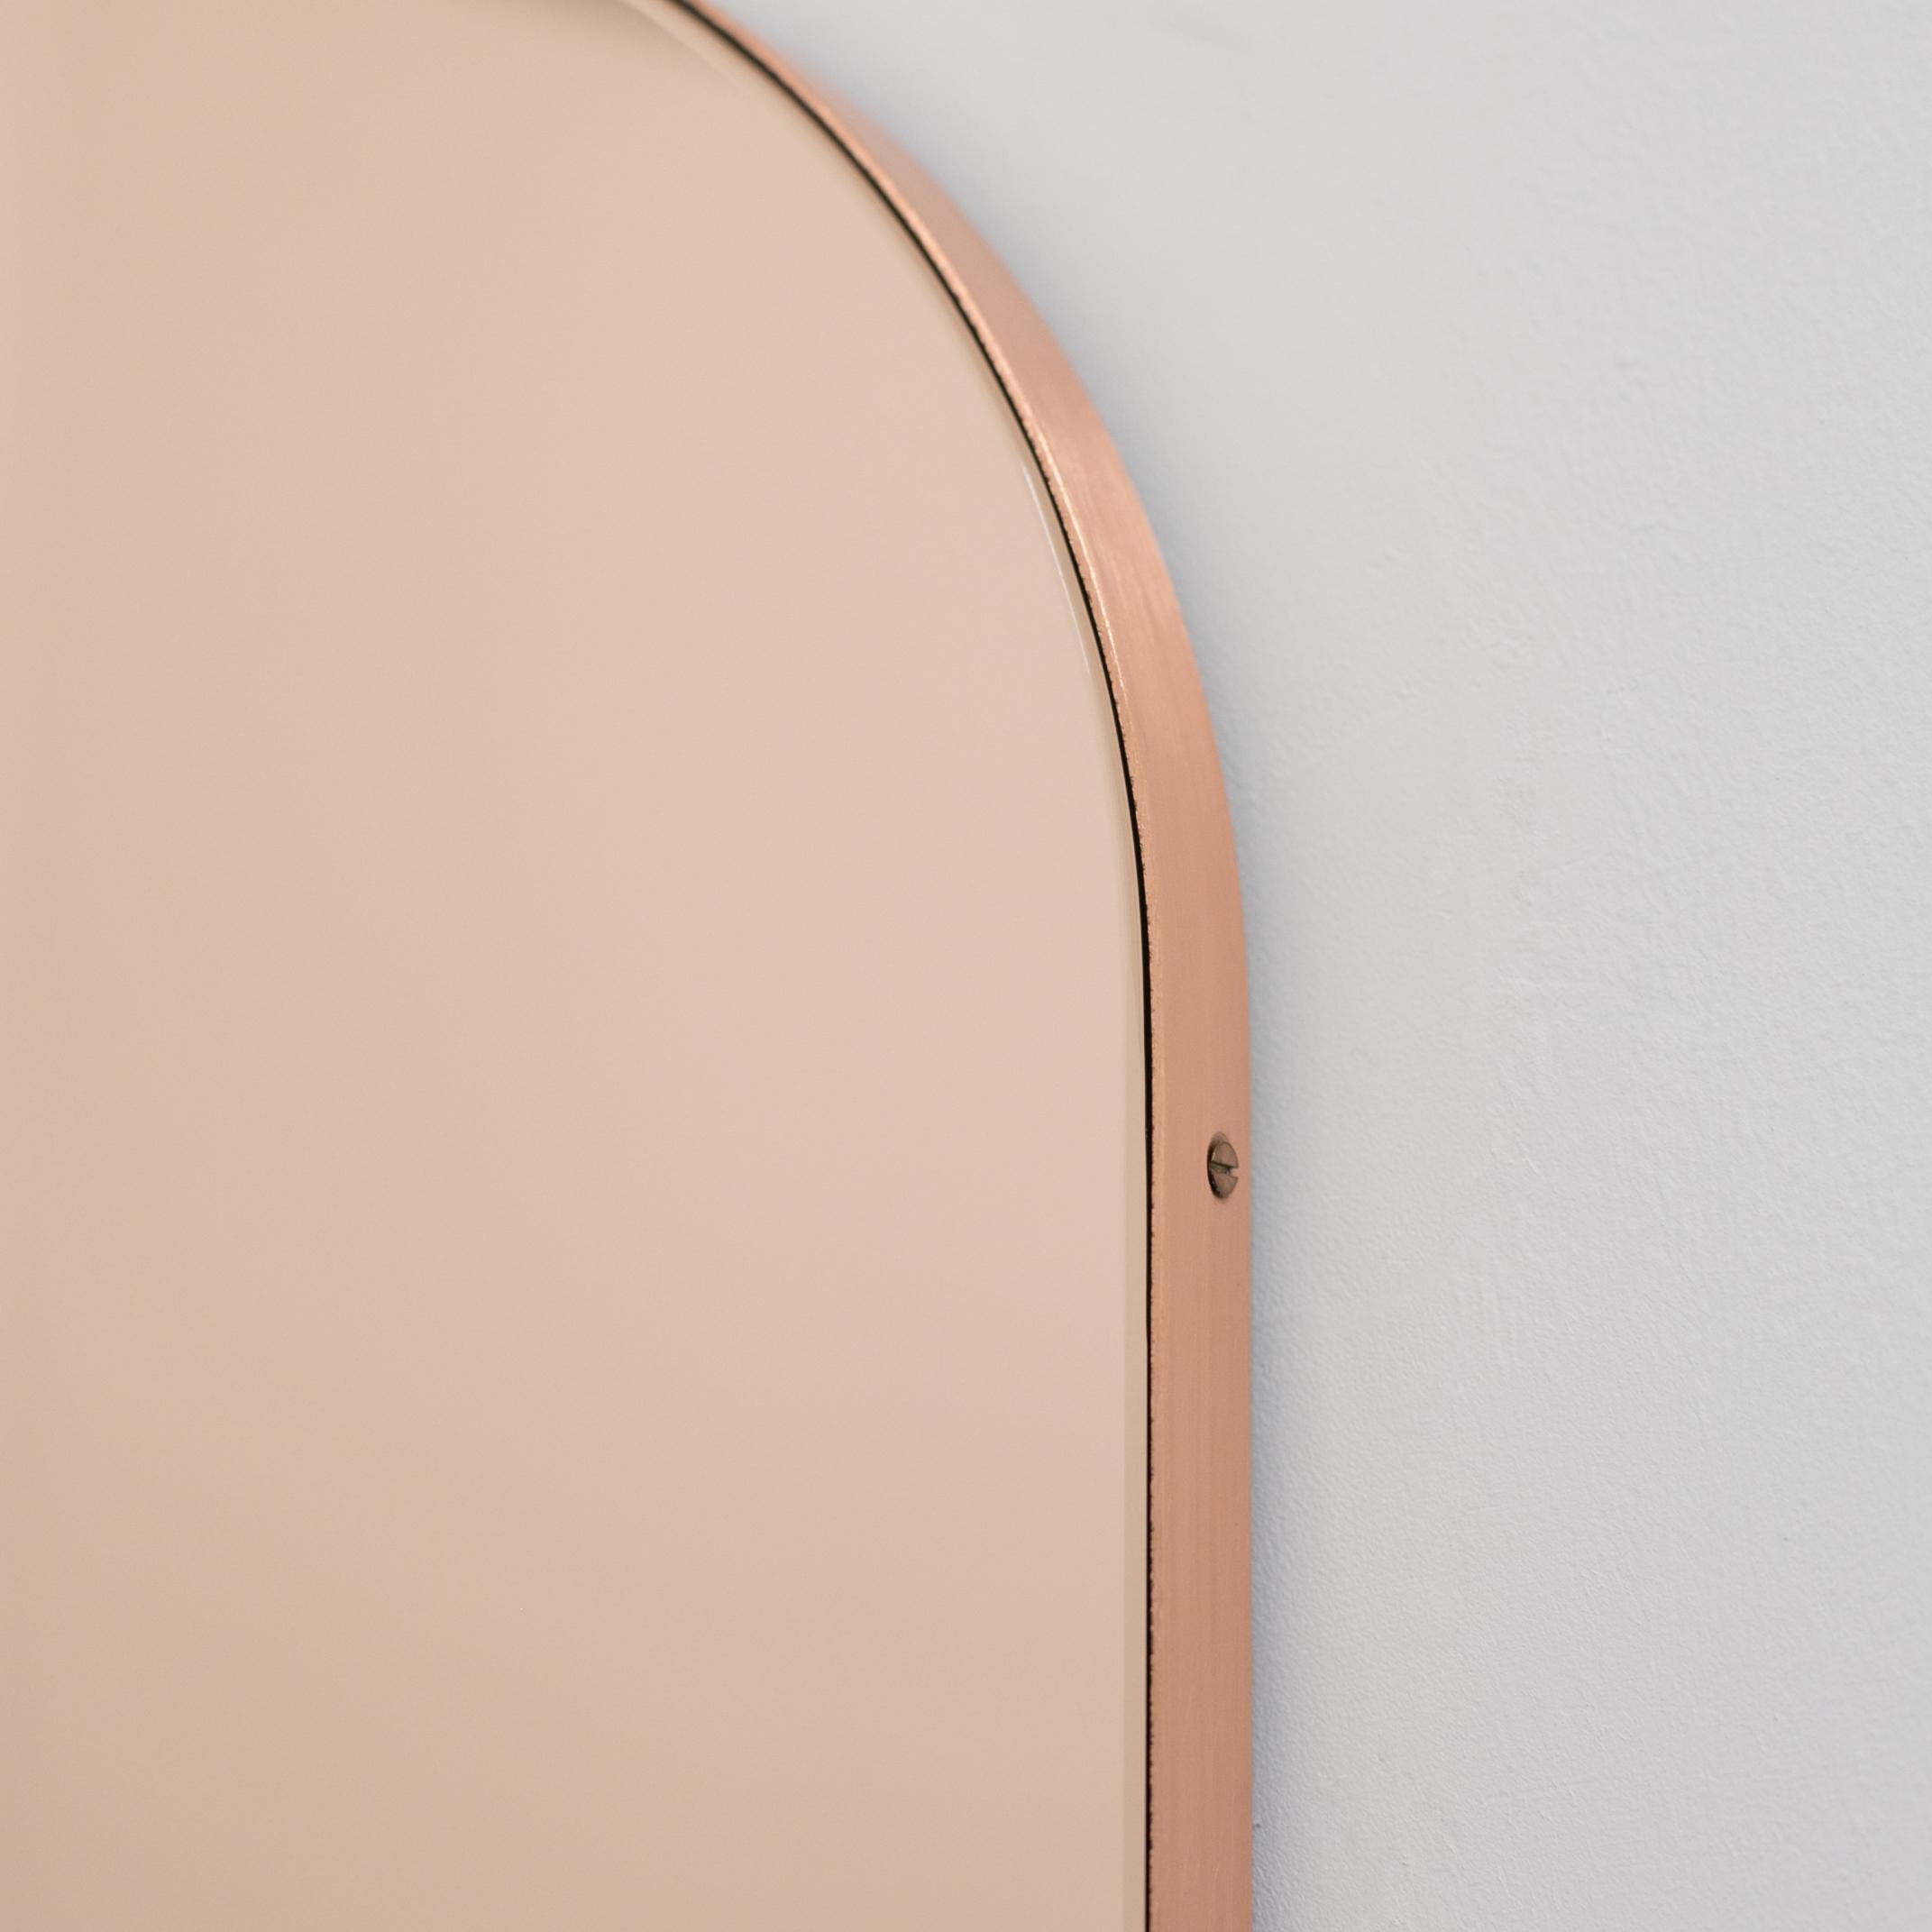 In Stock Arcus Arched Peach Contemporary Mirror with Copper Frame, Small 3